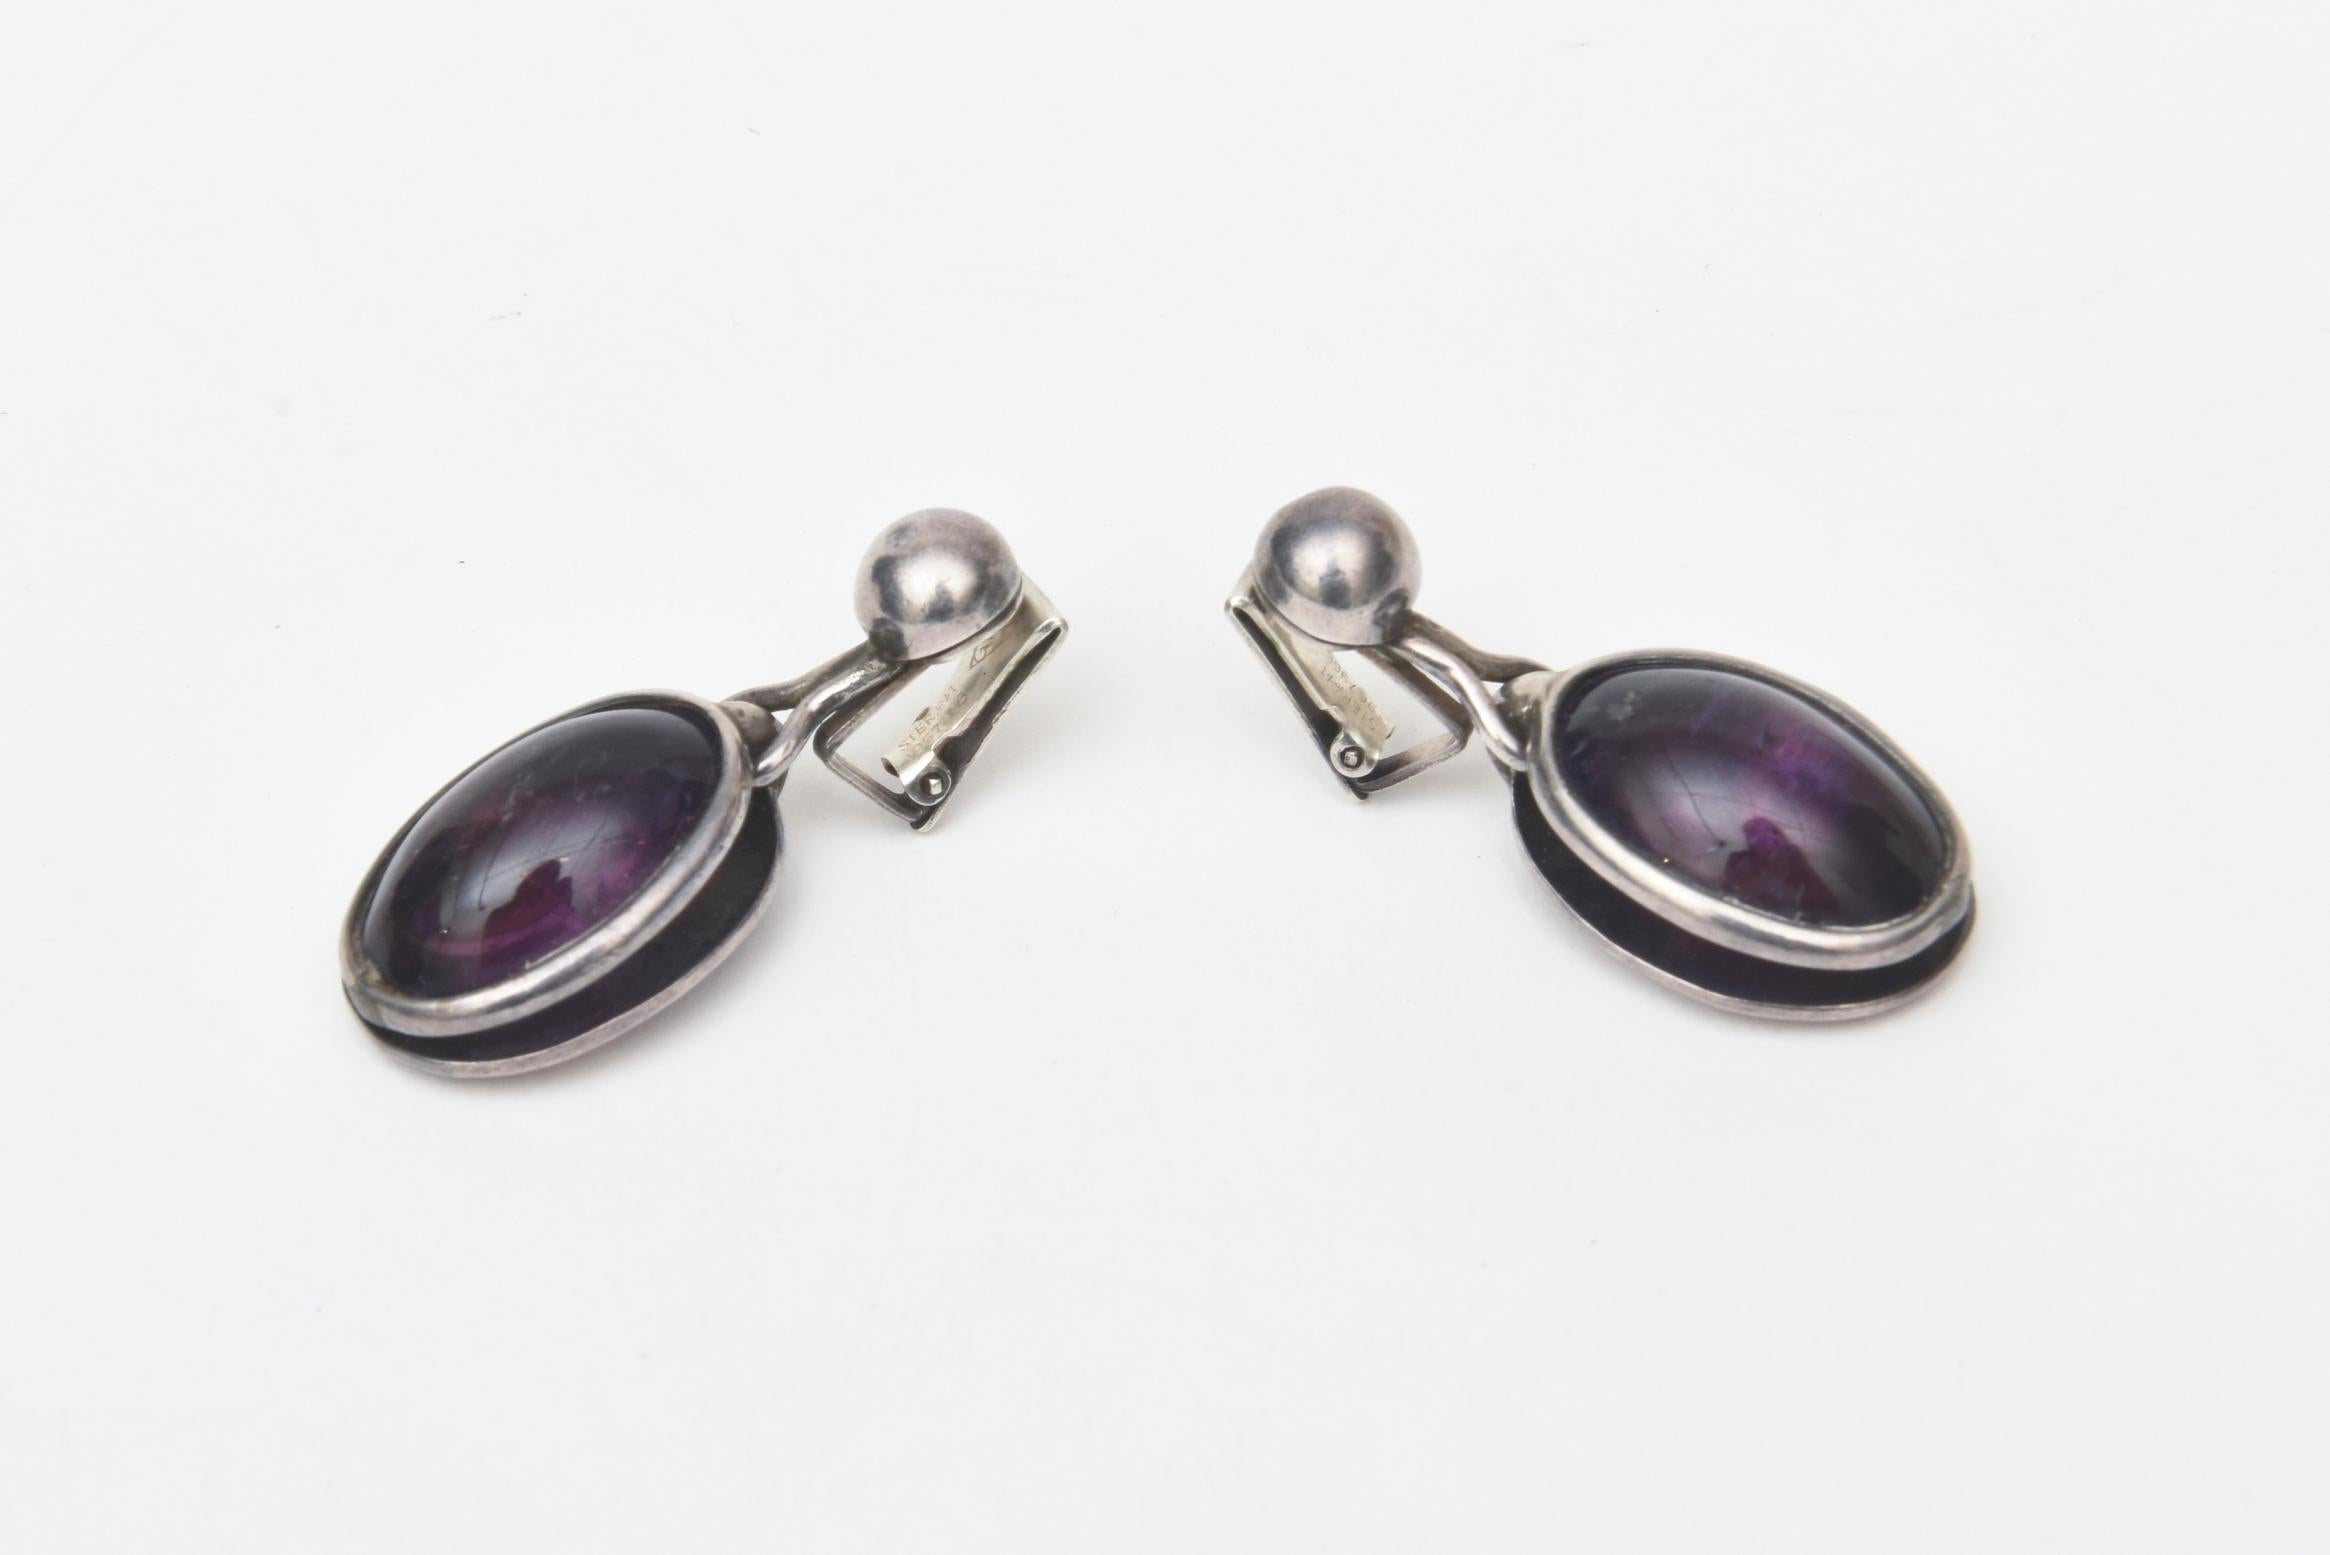 This stunning pair of vintage 1950's clip on drop dangle earrings are amethyst and sterling silver. They are mid century from the time period but remain modern in design and look. Beautifully made. They are marked Sterling Pat. 967965. Amethyst